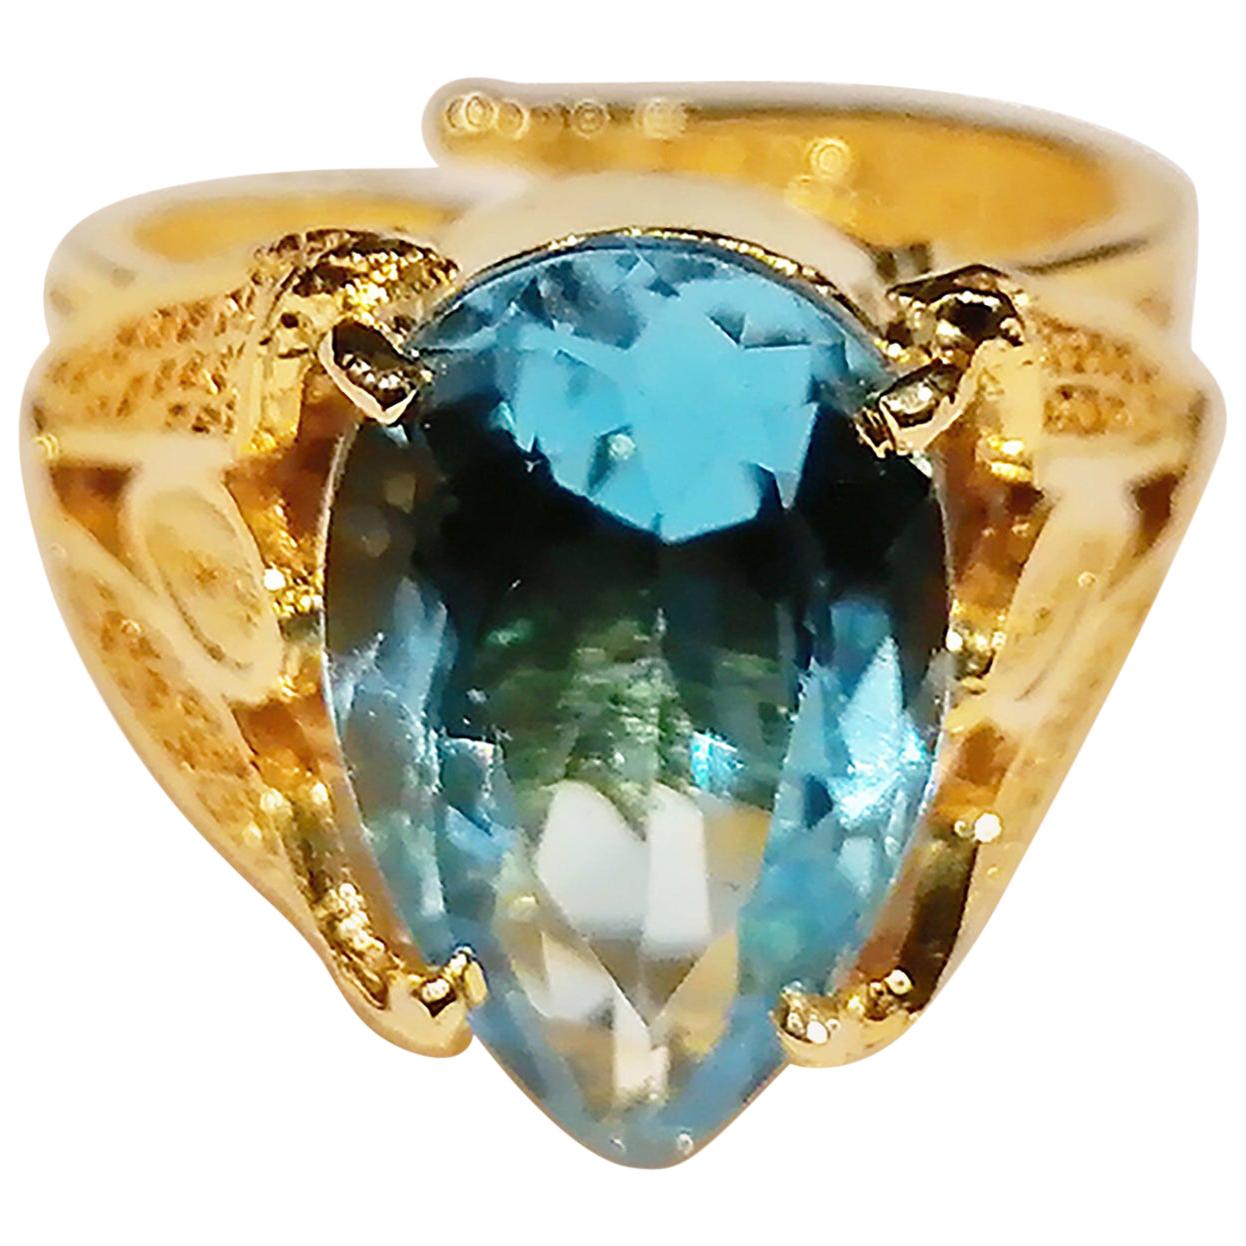 Holystone Indira Blue Topaz Ring with 5.6 Carat Blue Topaz in 18K Gold Vermeil For Sale